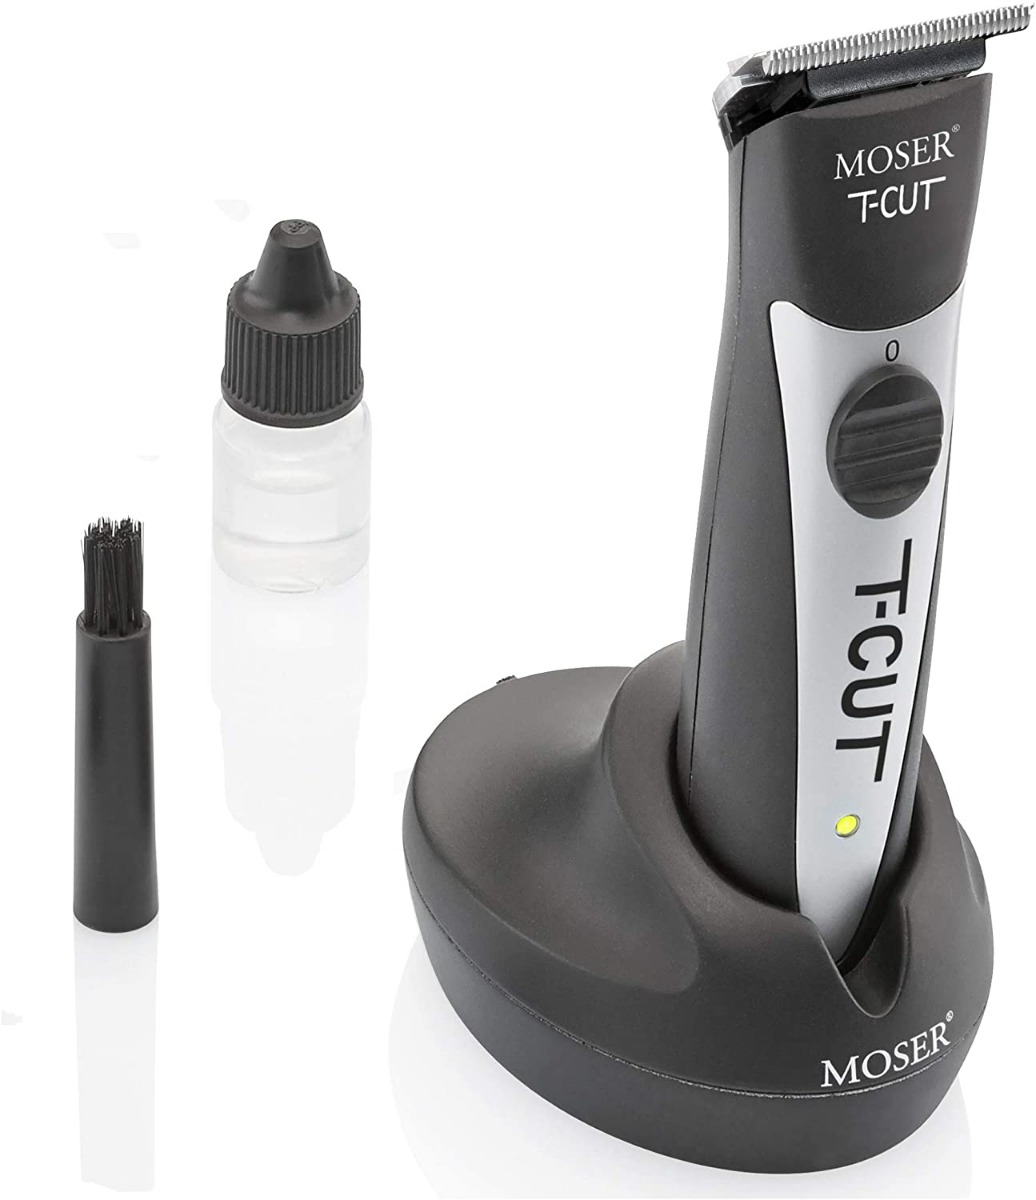 Moser T-Cut Professional Cord/Cordless Trimmer With T-Blade - 1591-0170